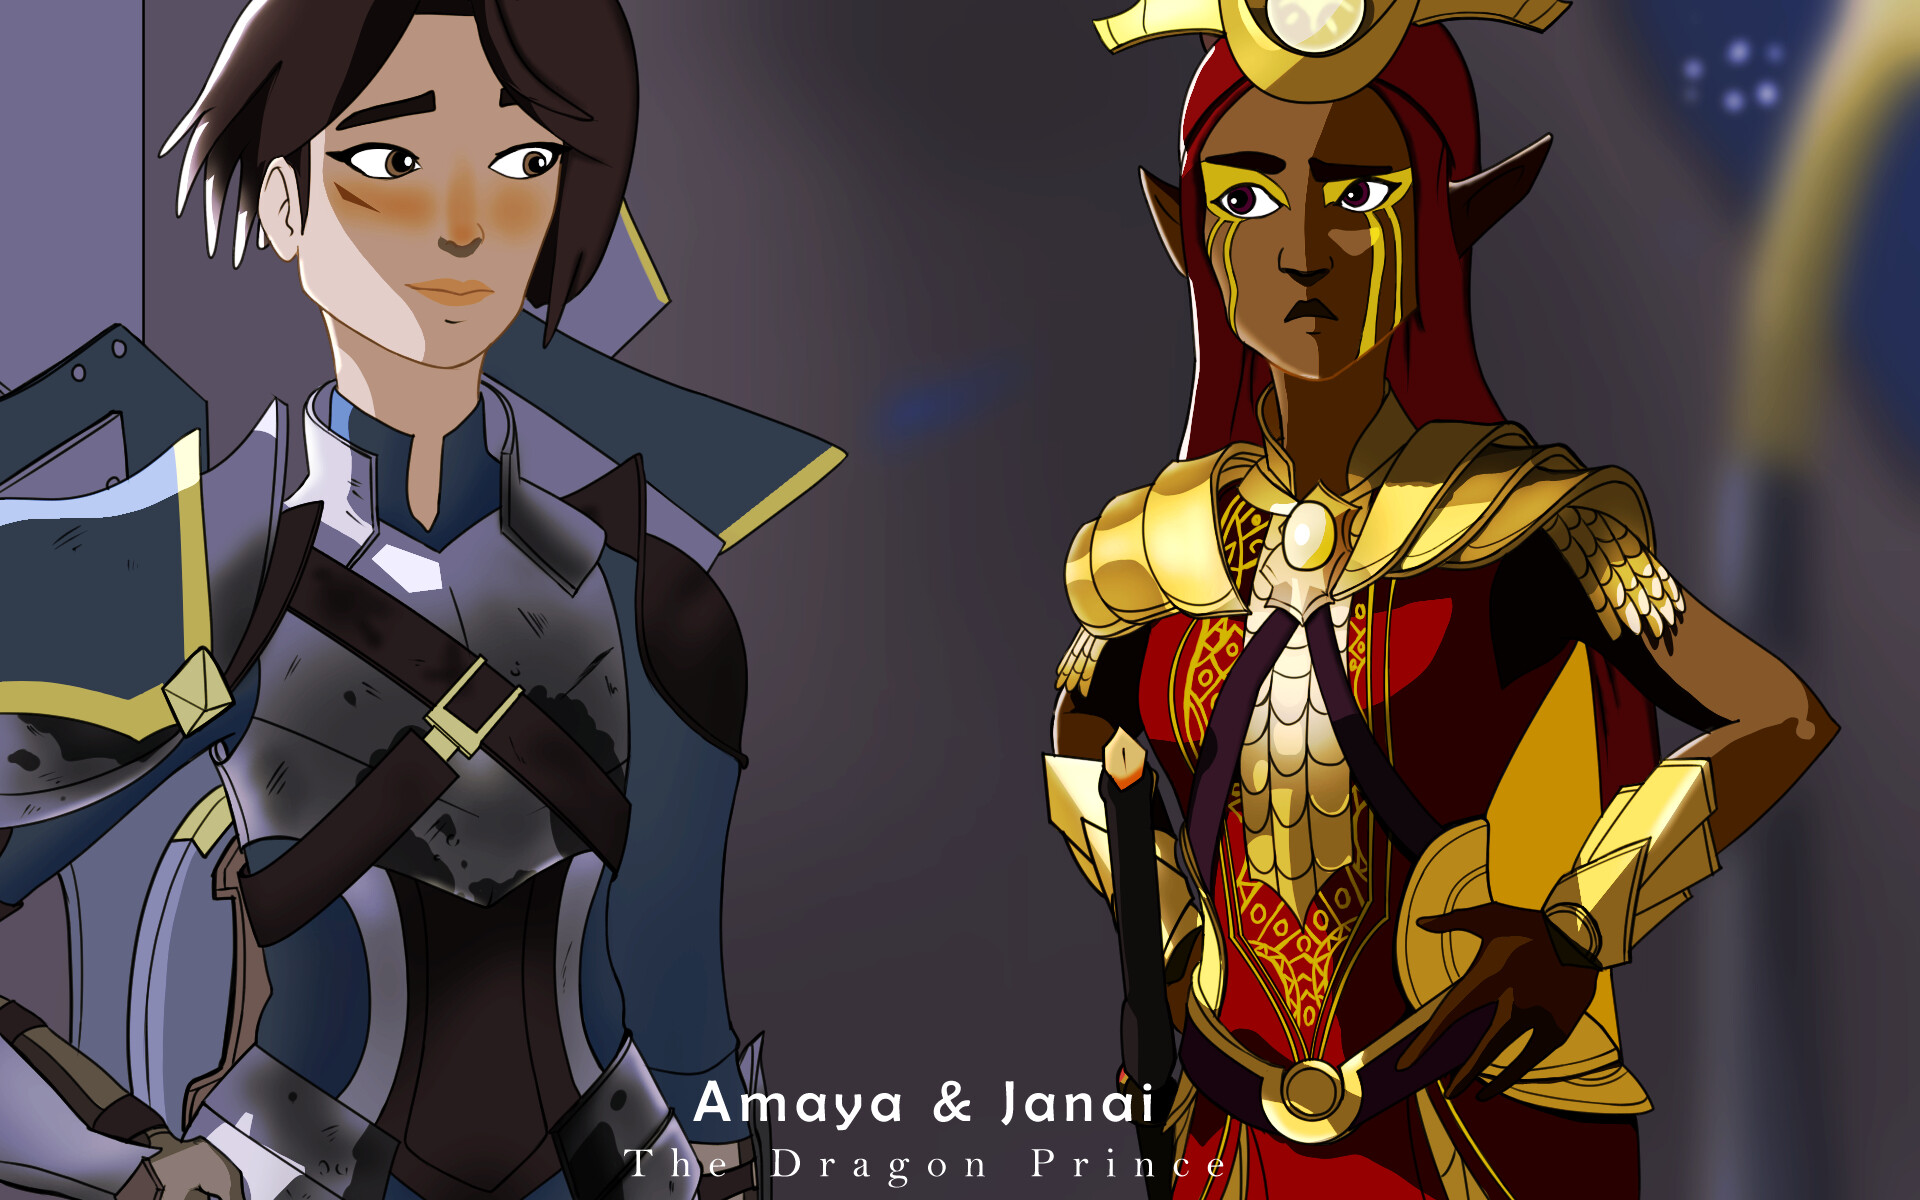 My two fav Character from the Netflix animation - The Dragon Prince.